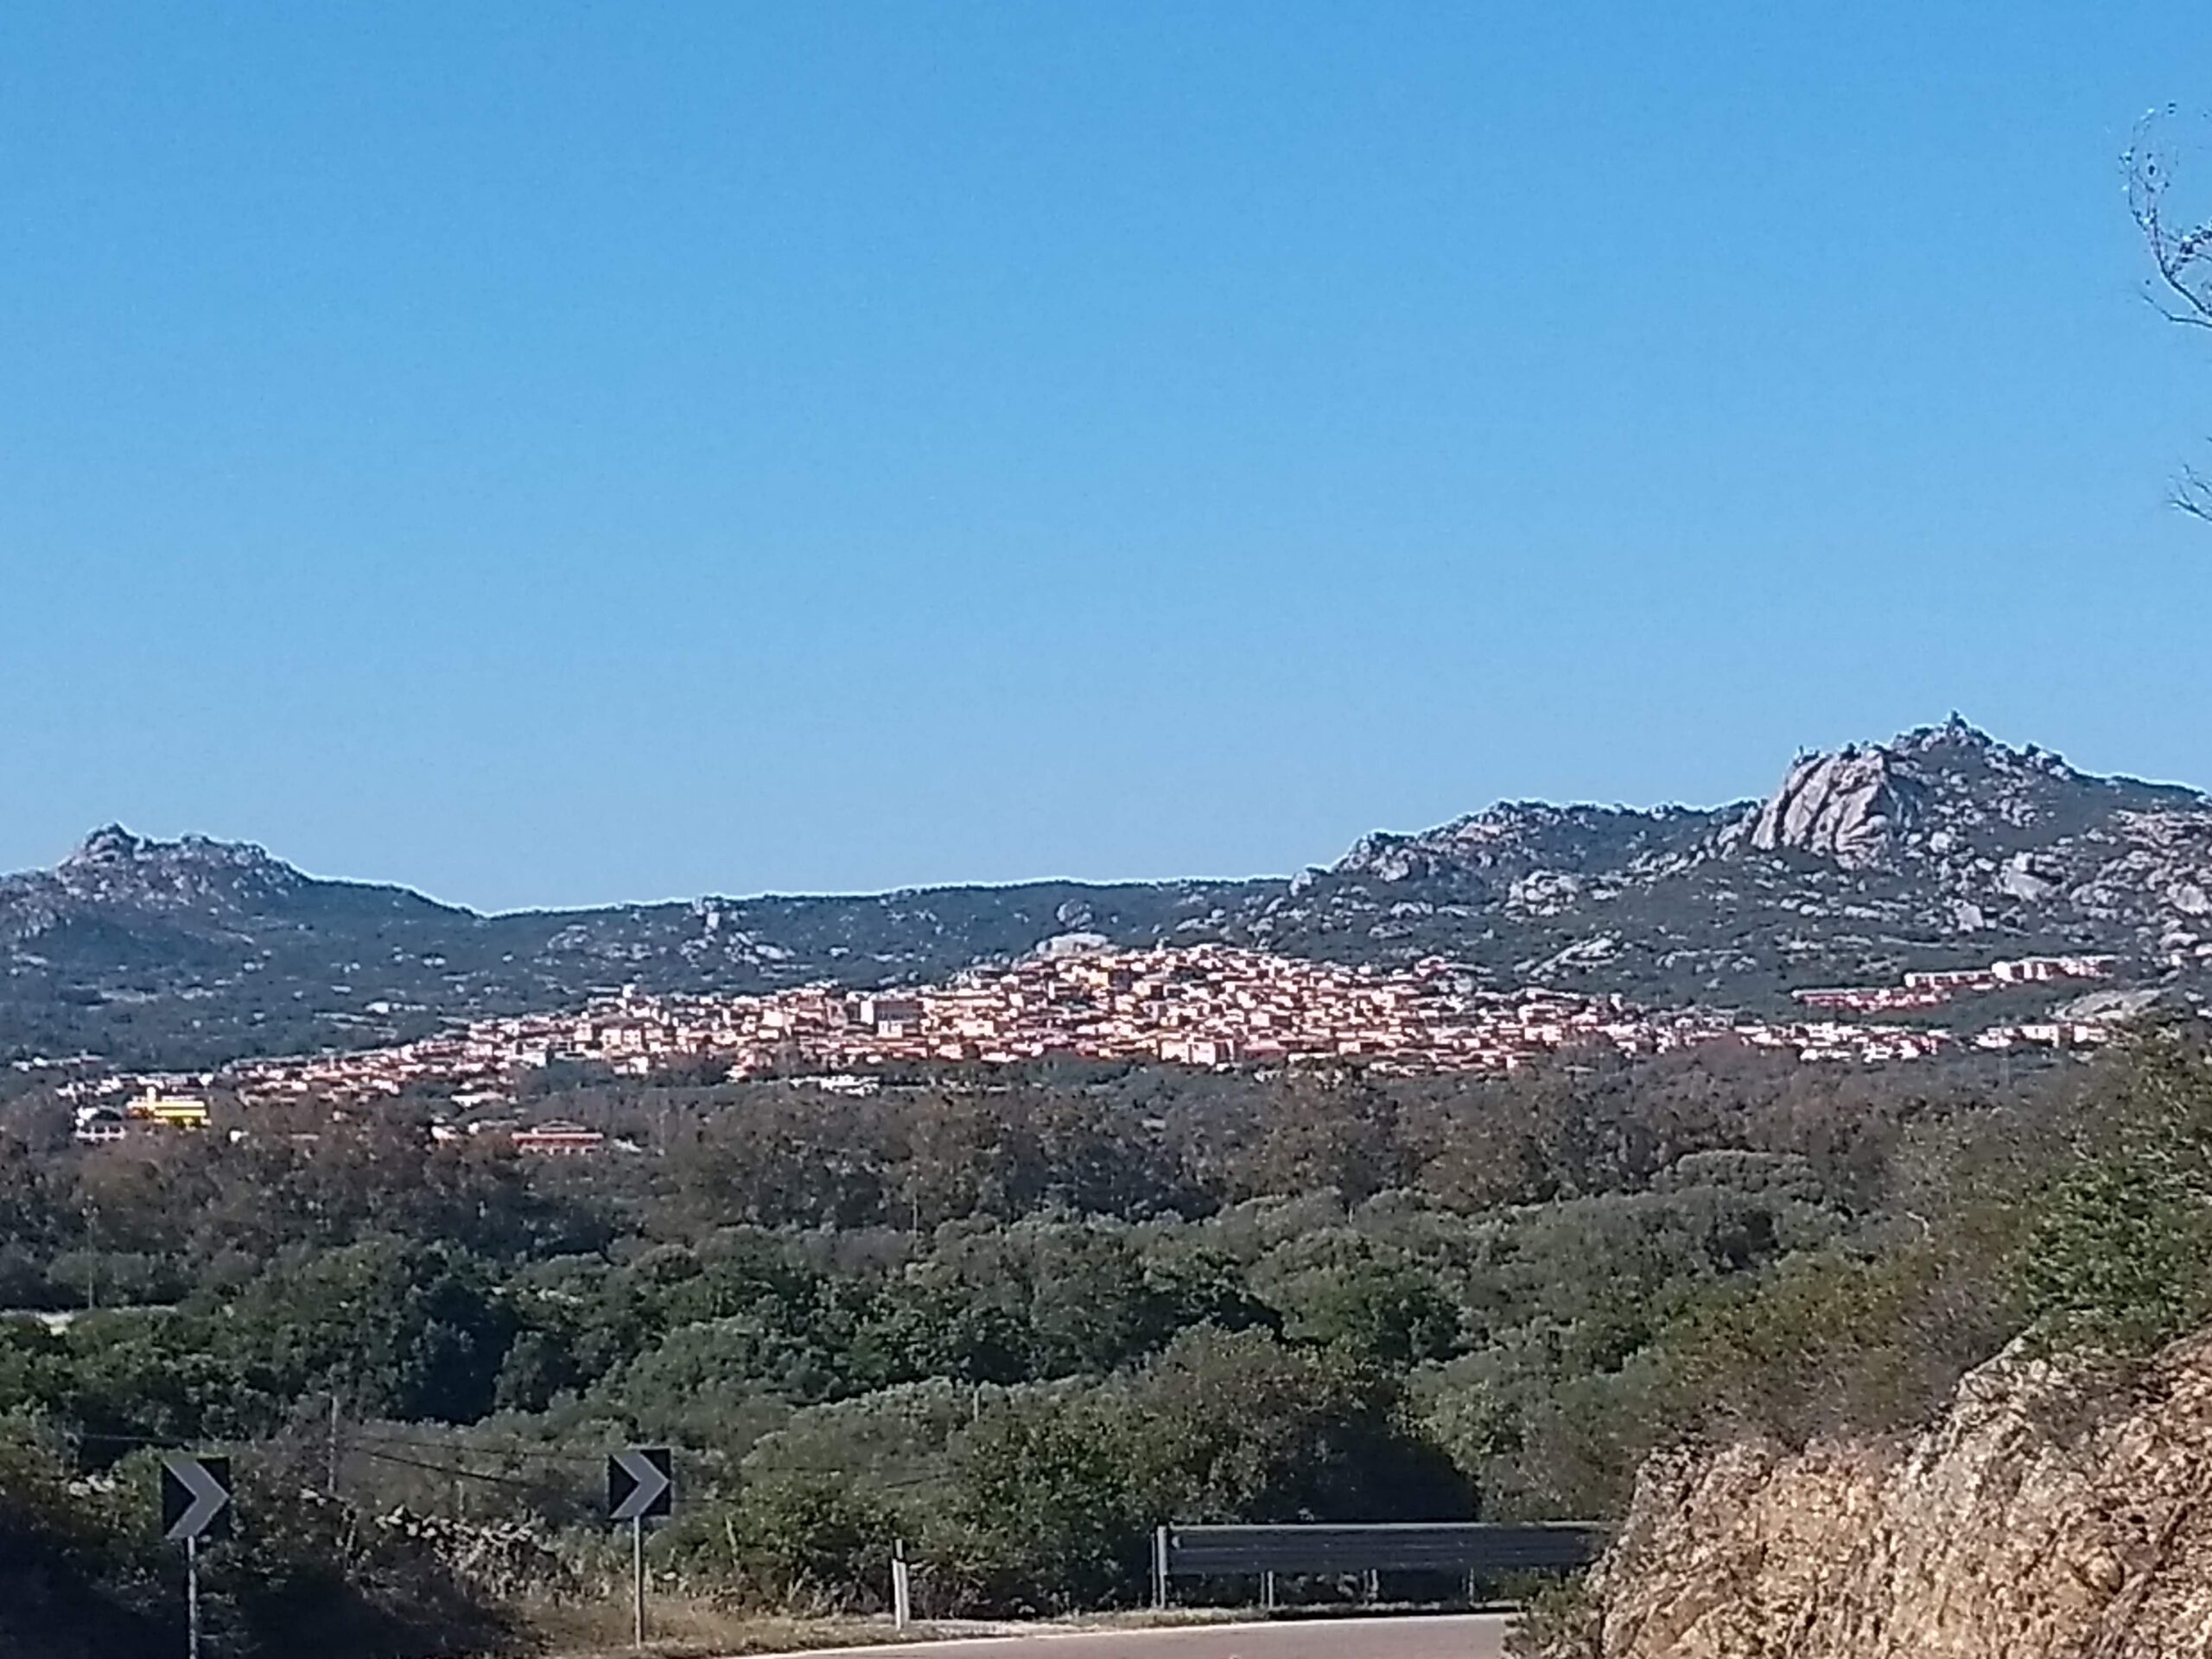 Arzachena seen from the road to Tempio